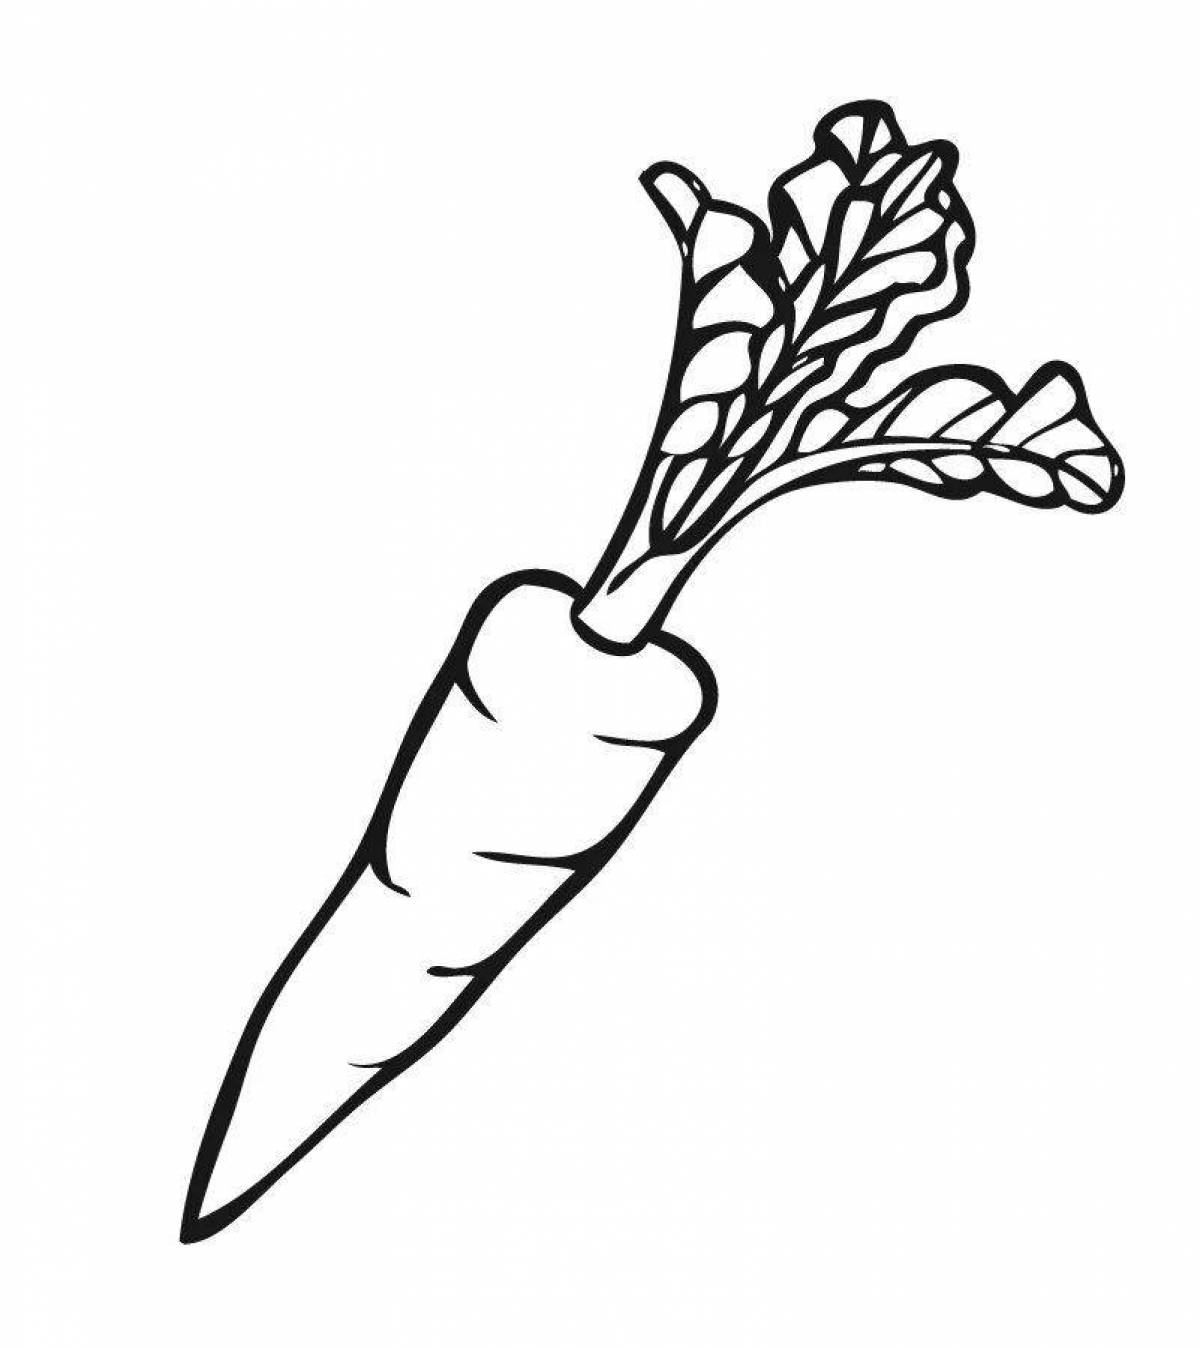 Funny carrot sketch